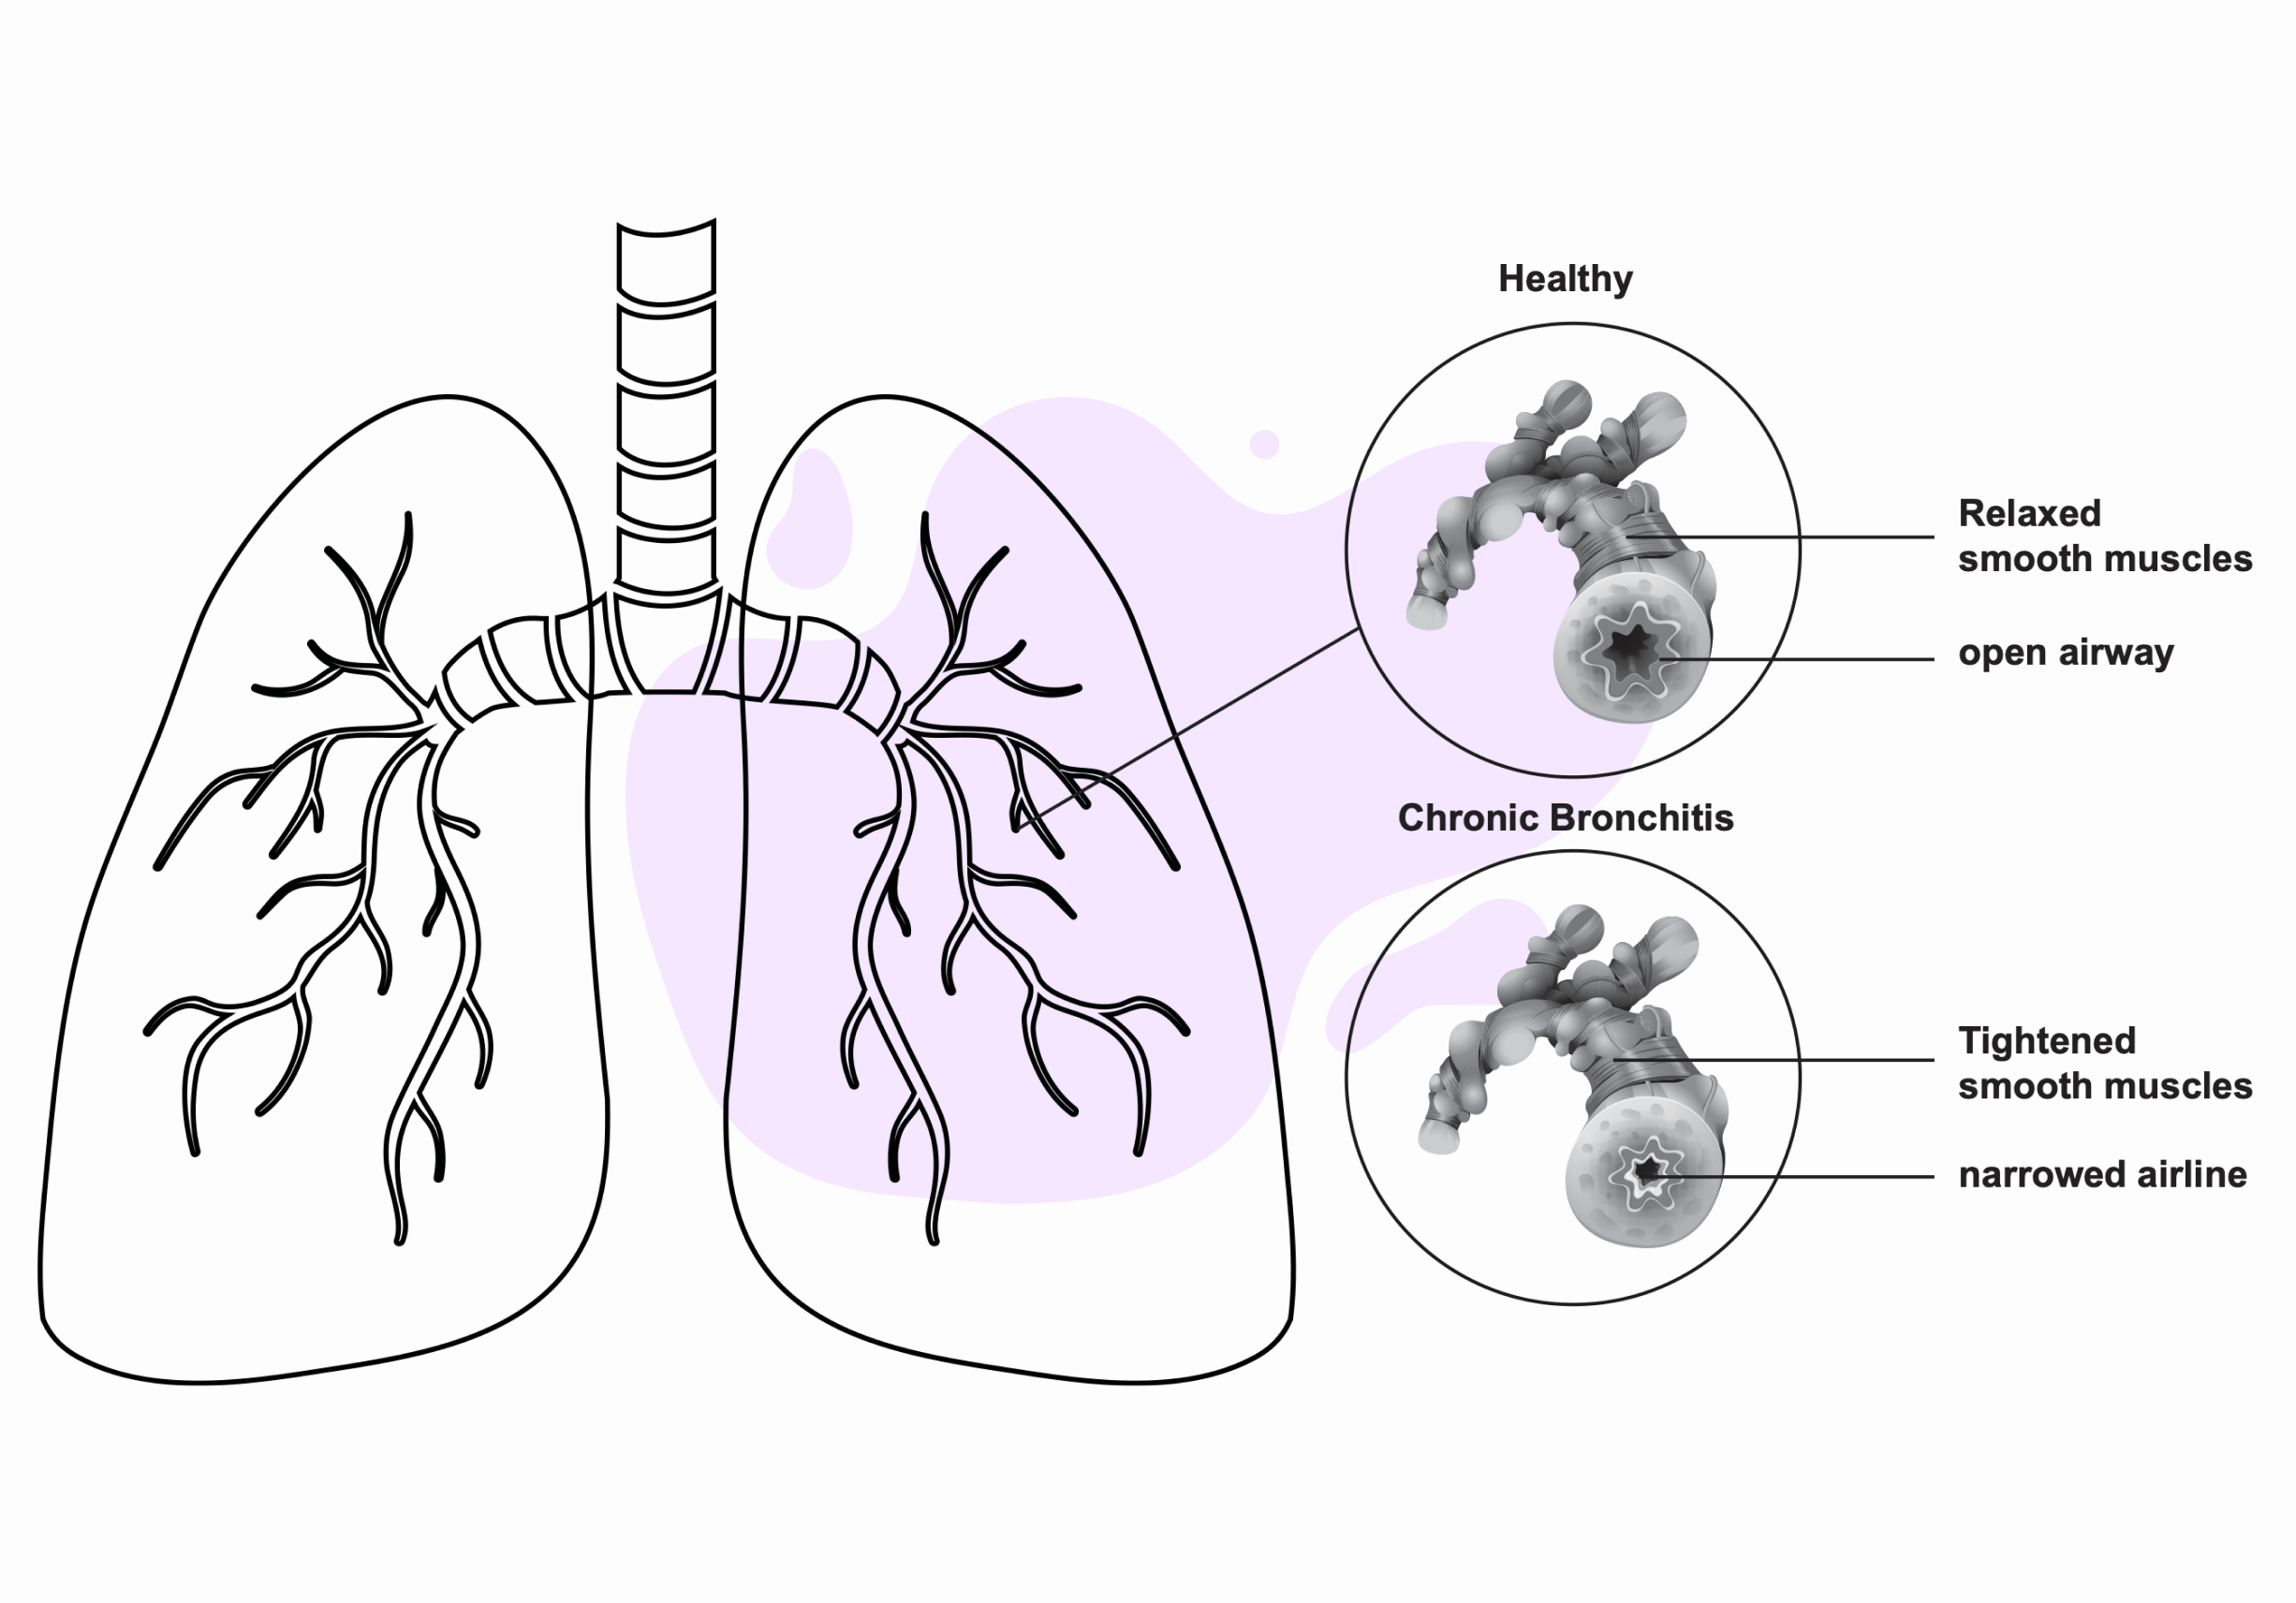 reduced lung function due to ozone